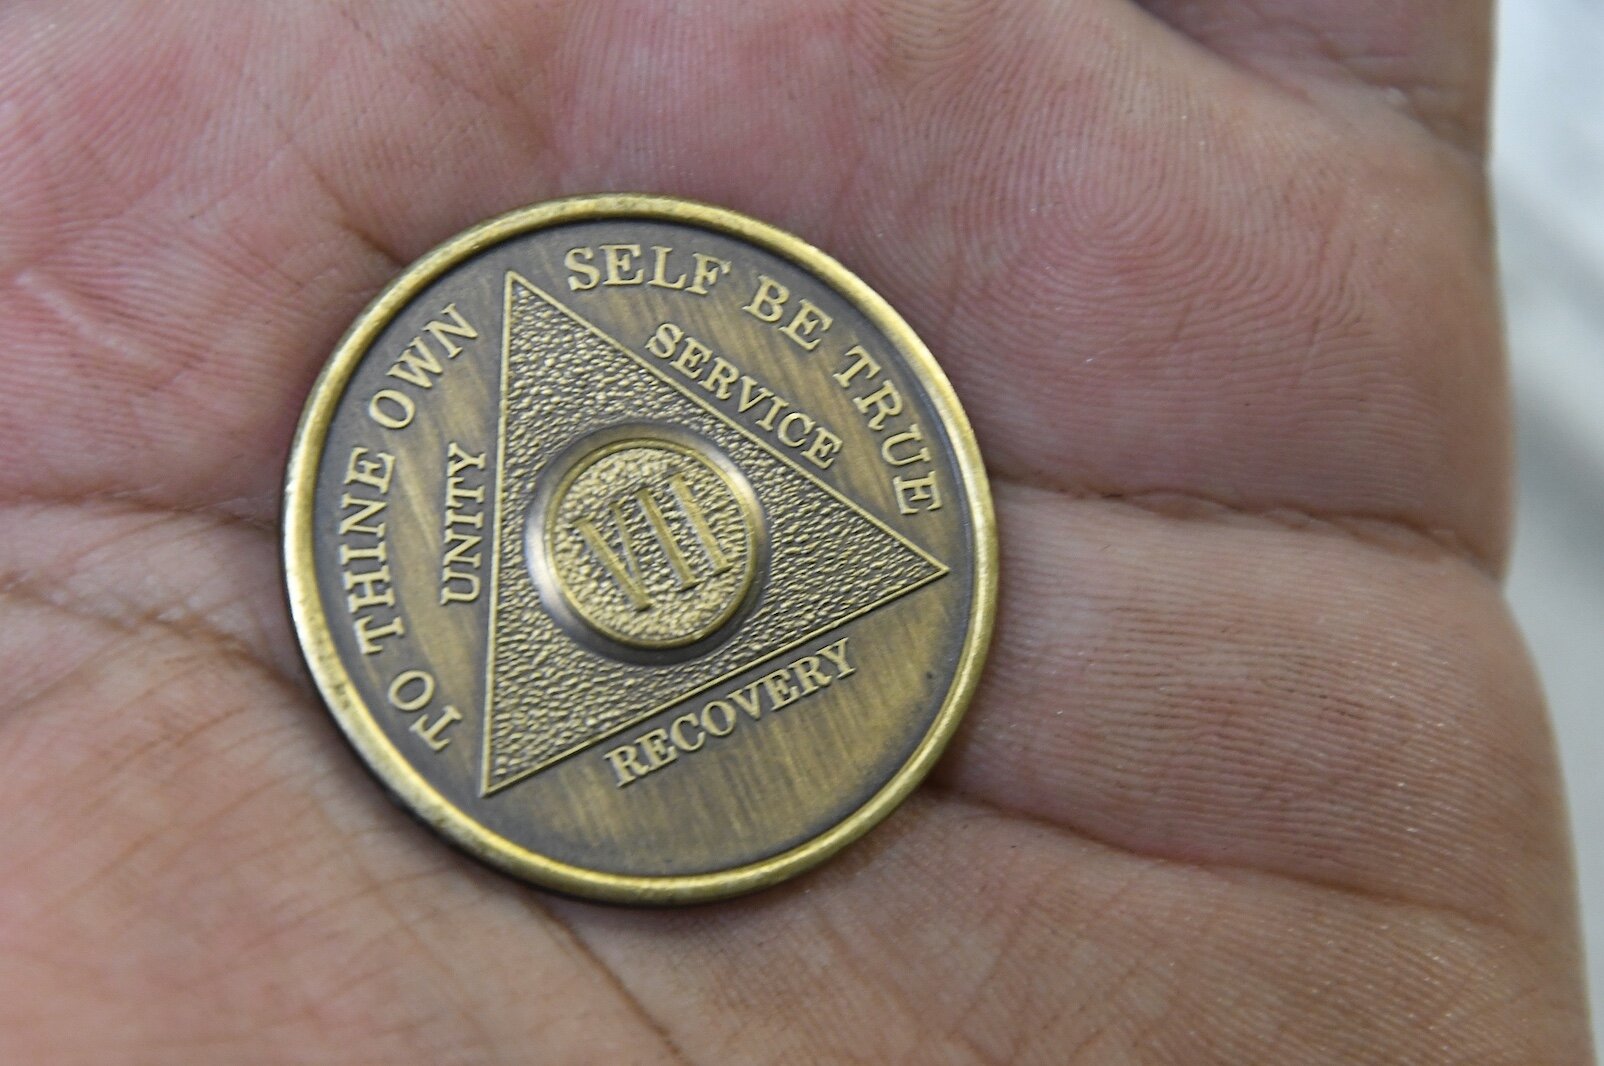 An AA member at the Pine Creek Reservation holds a coin illustrating some of the tenants of Alcoholics Anonymous.